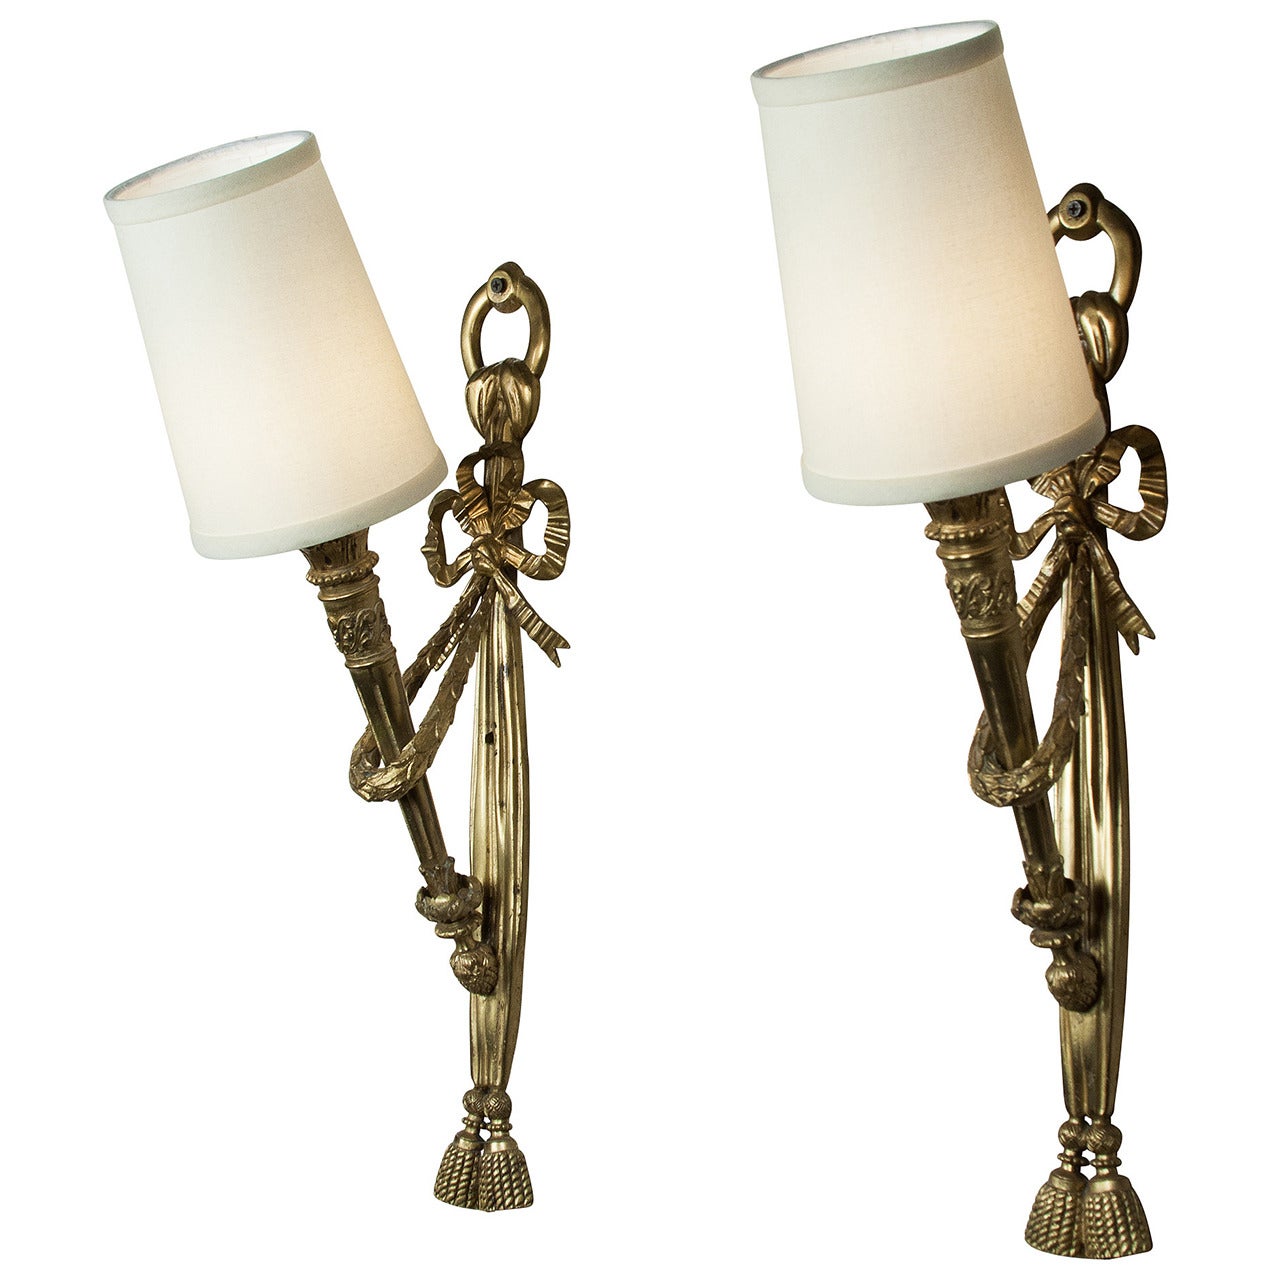 Pair of Tall Torch Wall Sconces For Sale